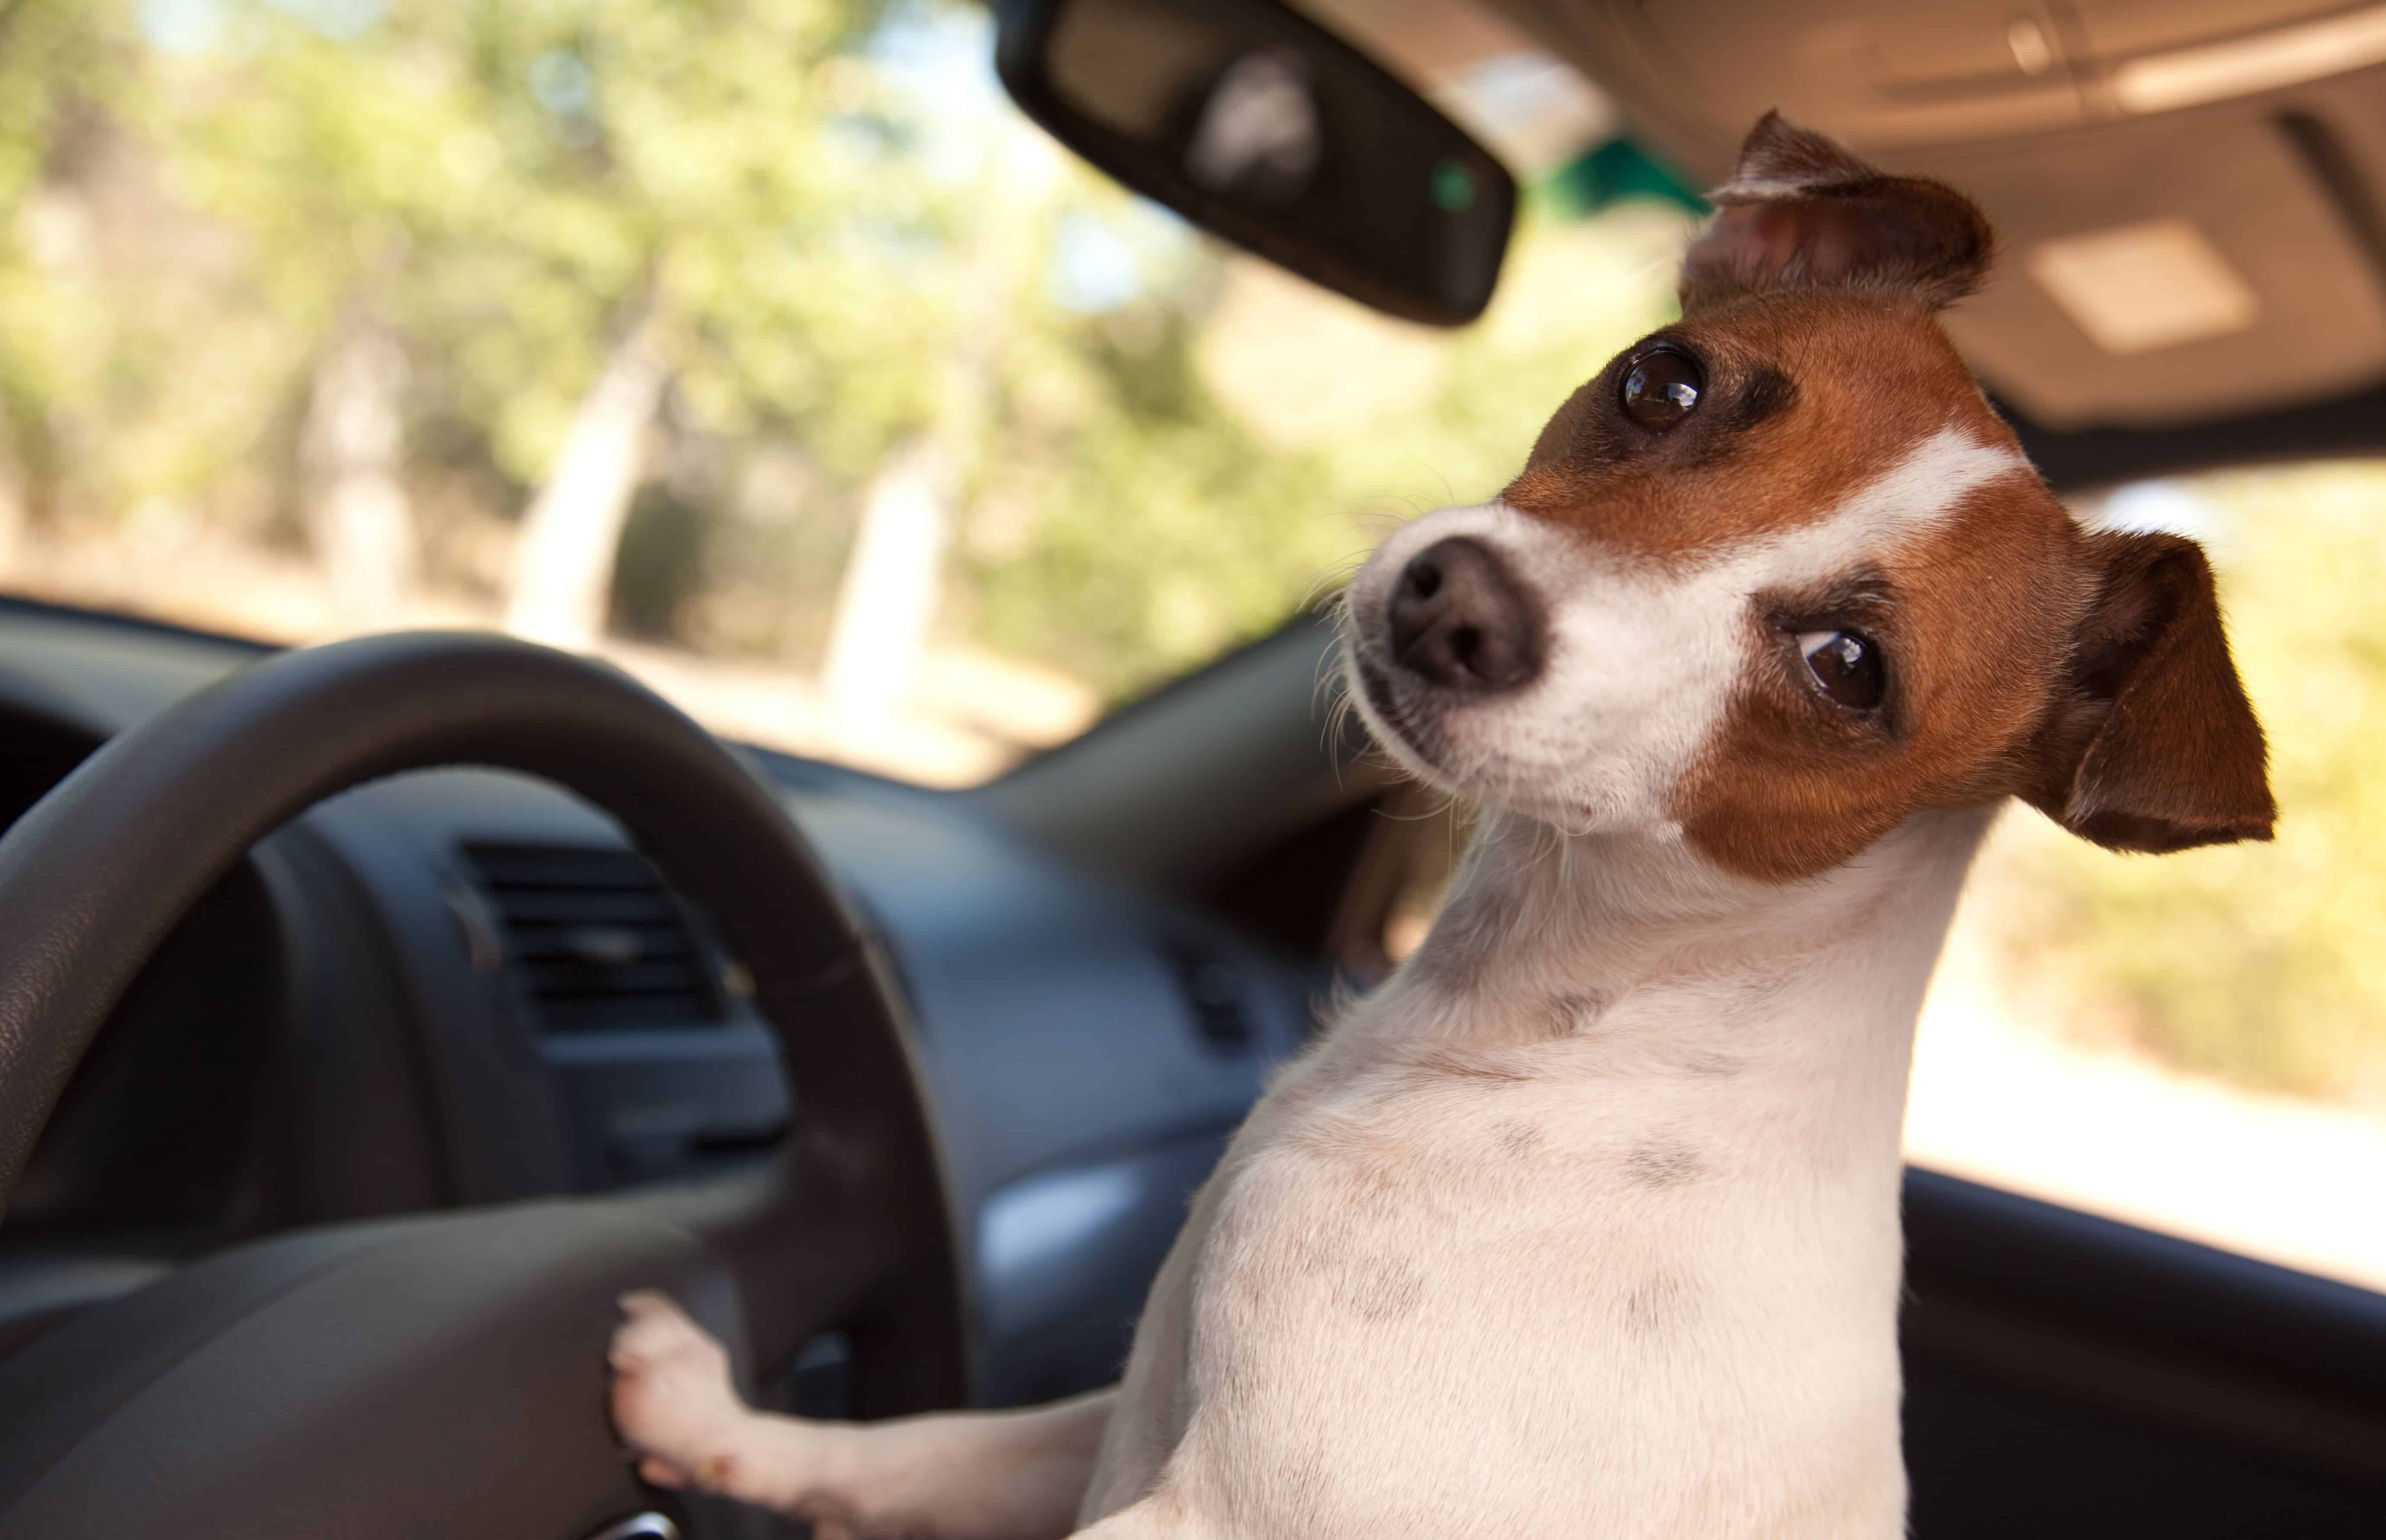 Does Auto Insurance Cover Dog Scratches?